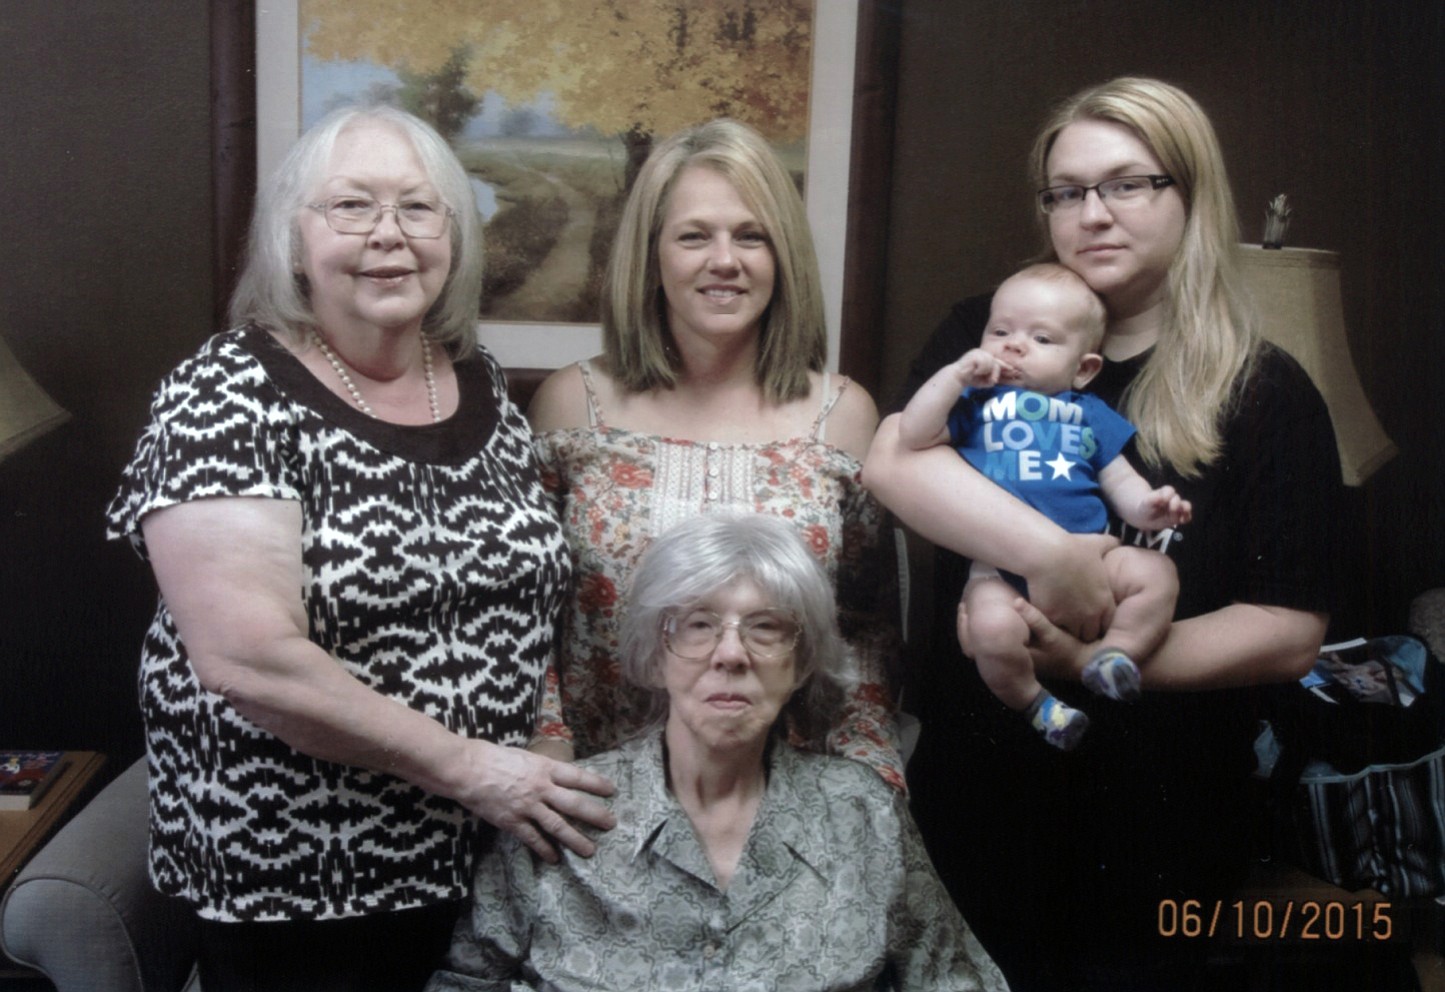 Ruth Wood of Vancouver (seated in front) was visited recently by family members from Lewiston, Idaho, including her great-great grandson, Emmett Lee Pearson, 4 months.